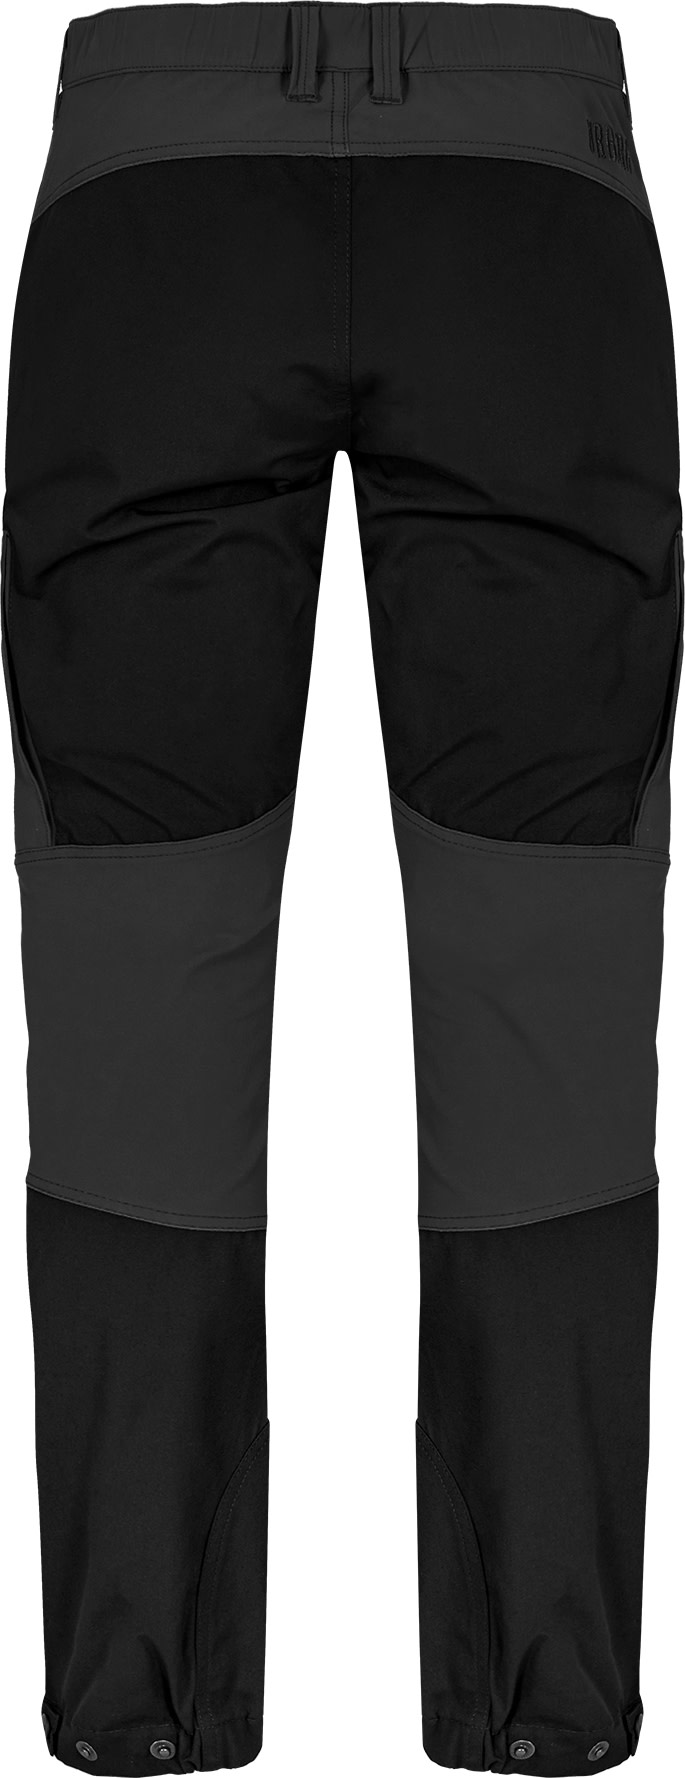 Mens Waterproof Mens Insulated Hiking Pants For Outdoor Activities Soft  Shell Clothings For Trekking, Fishing, Fish Climbing, Camping, Skiing  Climbin288S From Geymf, $29.04 | DHgate.Com